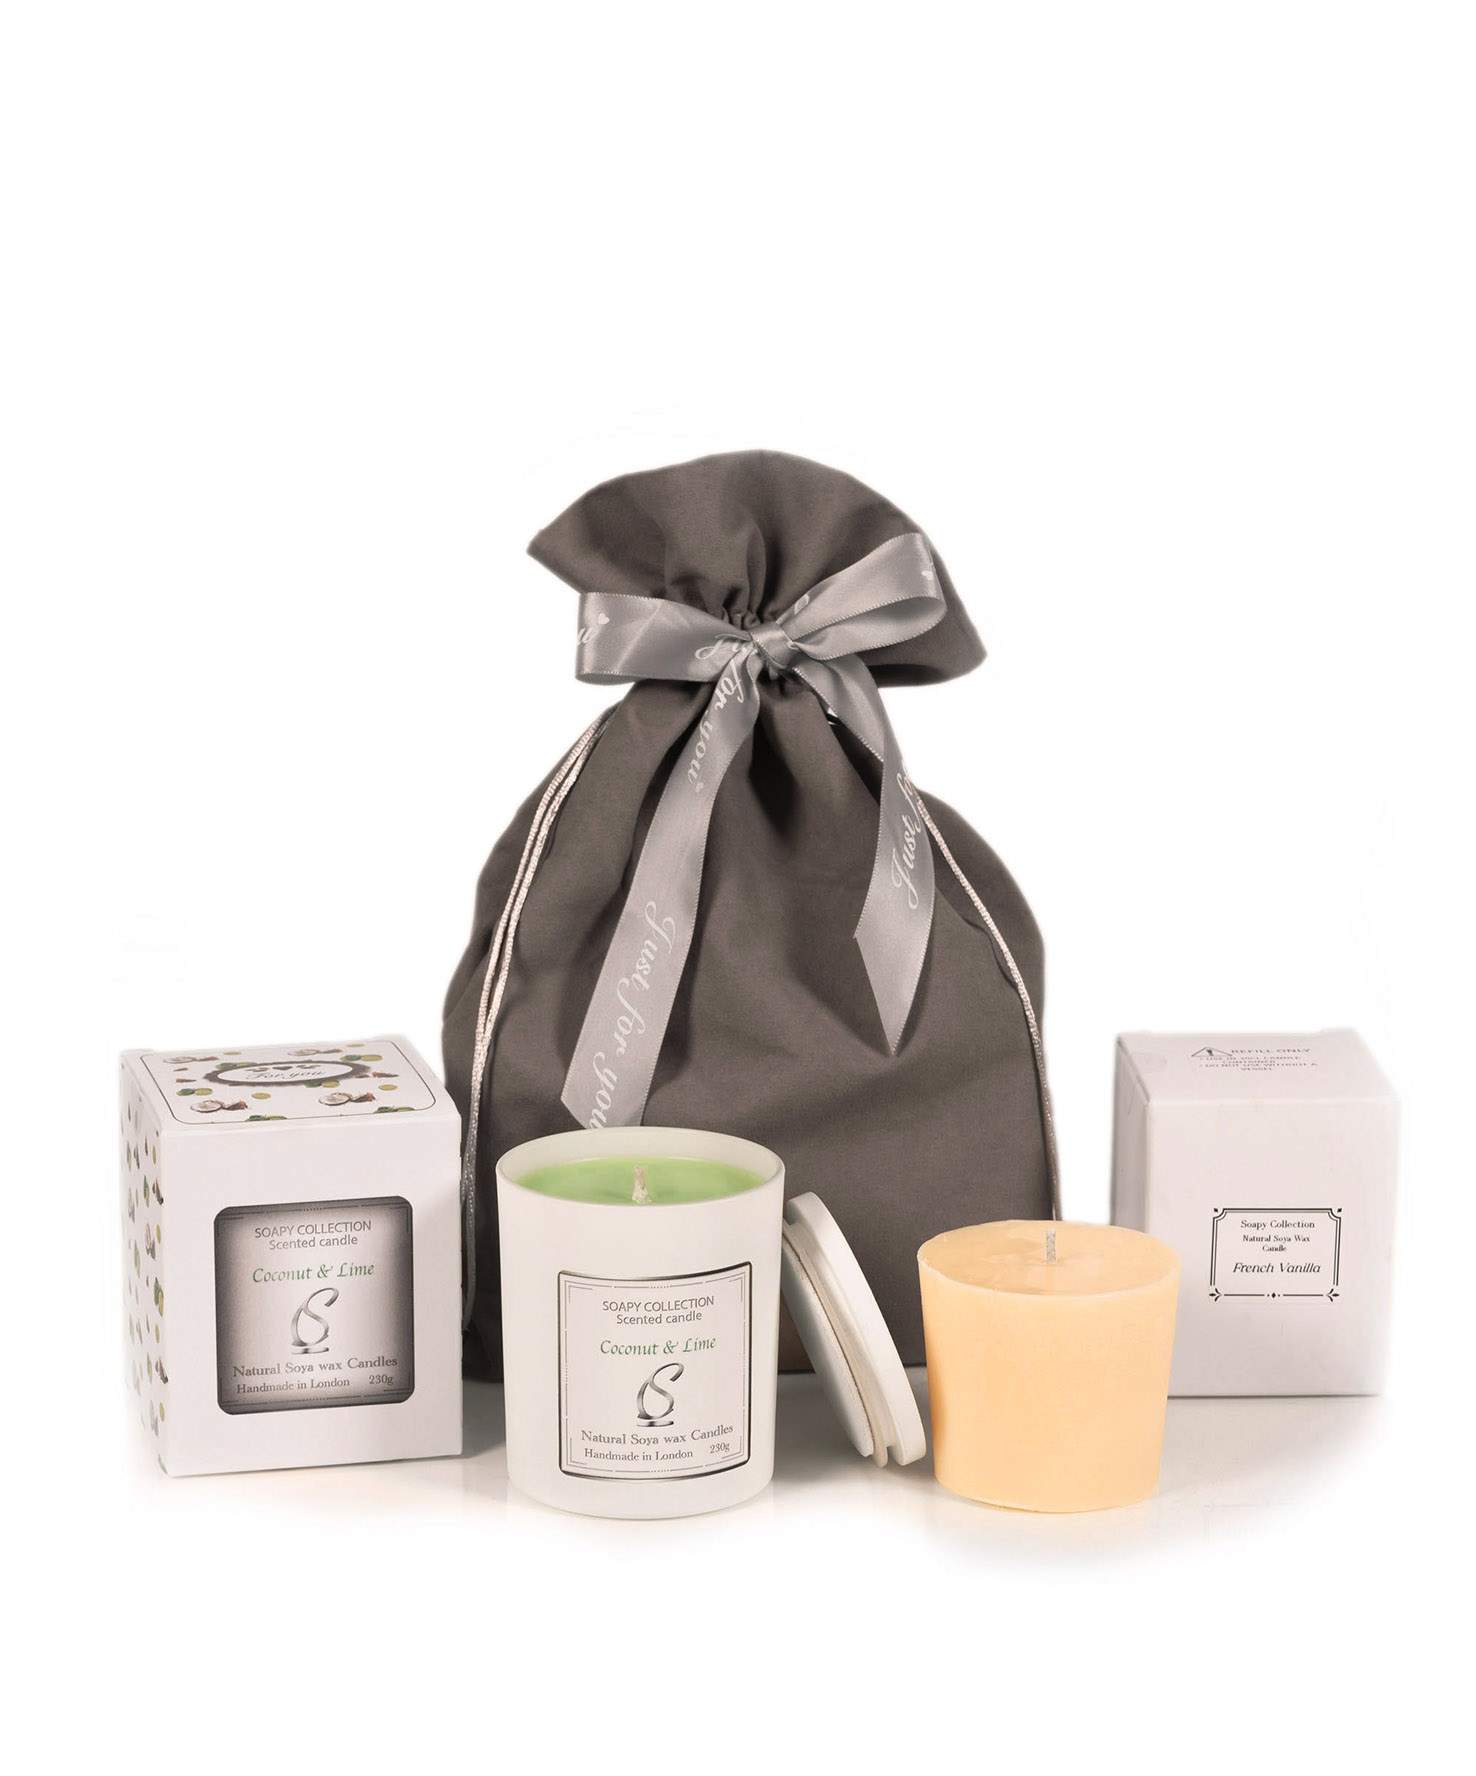 Scented Candles Gift Set – Body & Earth Inc